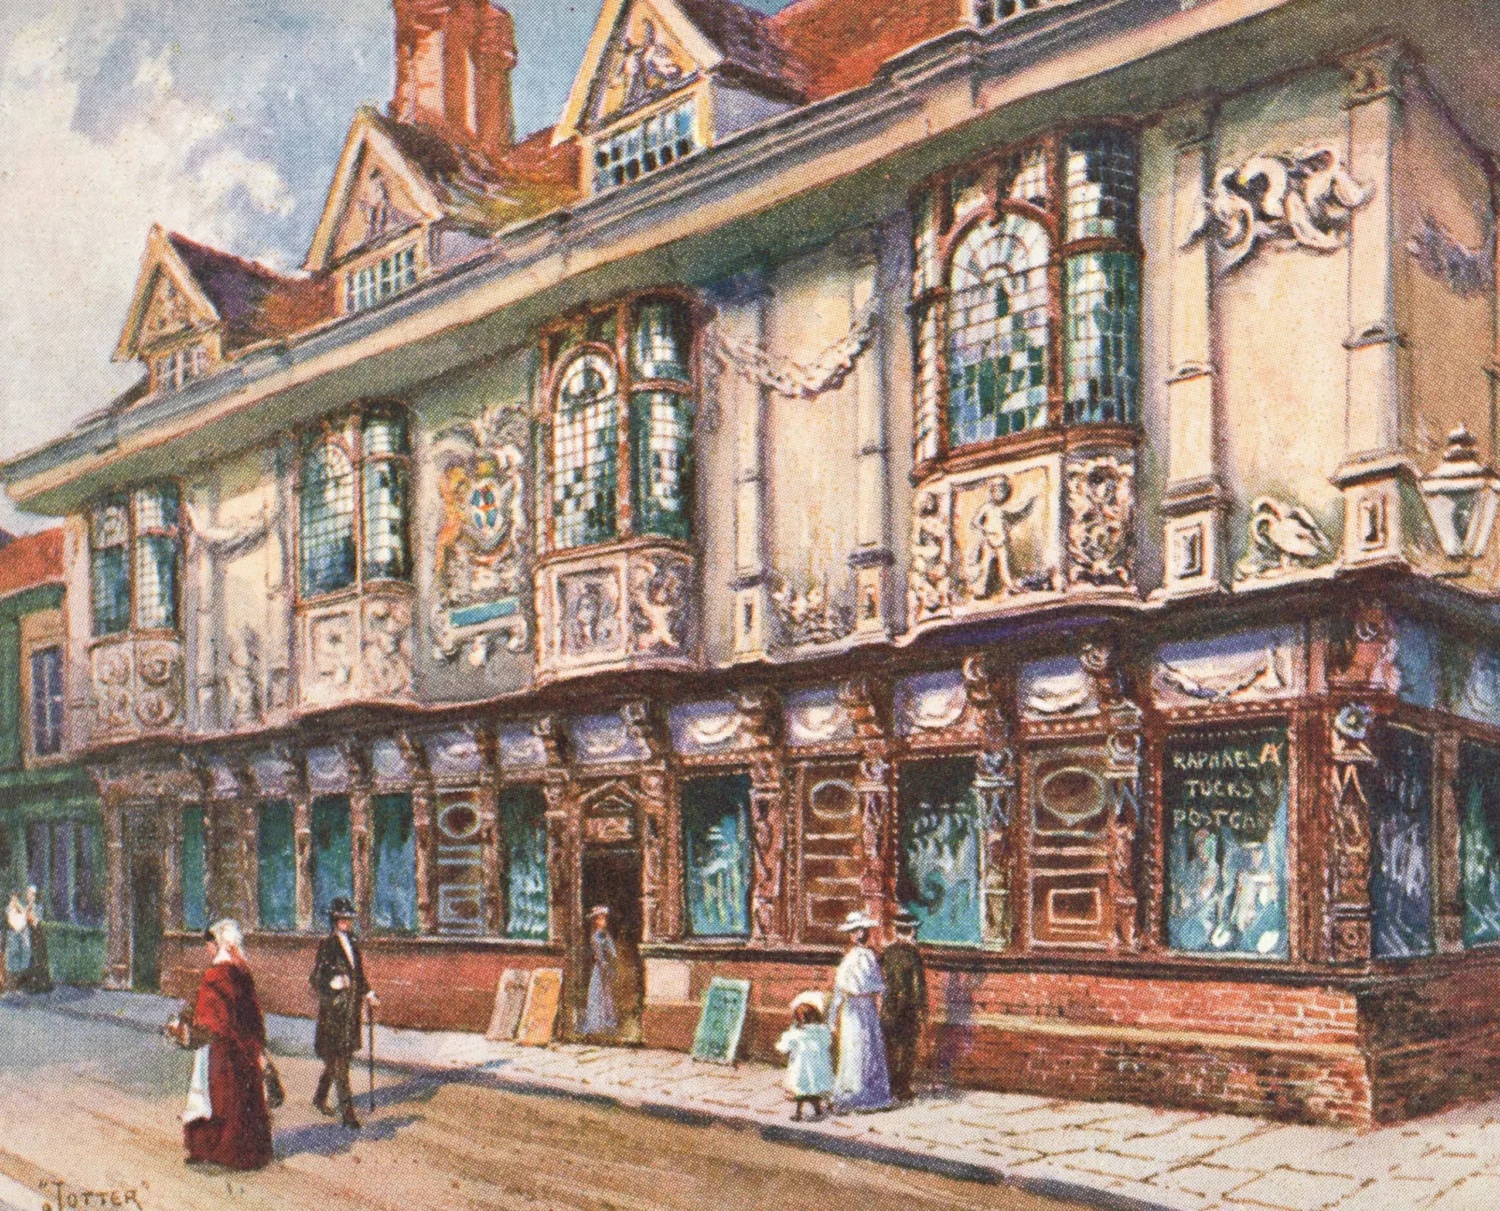 A vintage illustration of the Ancient House, Ipswich